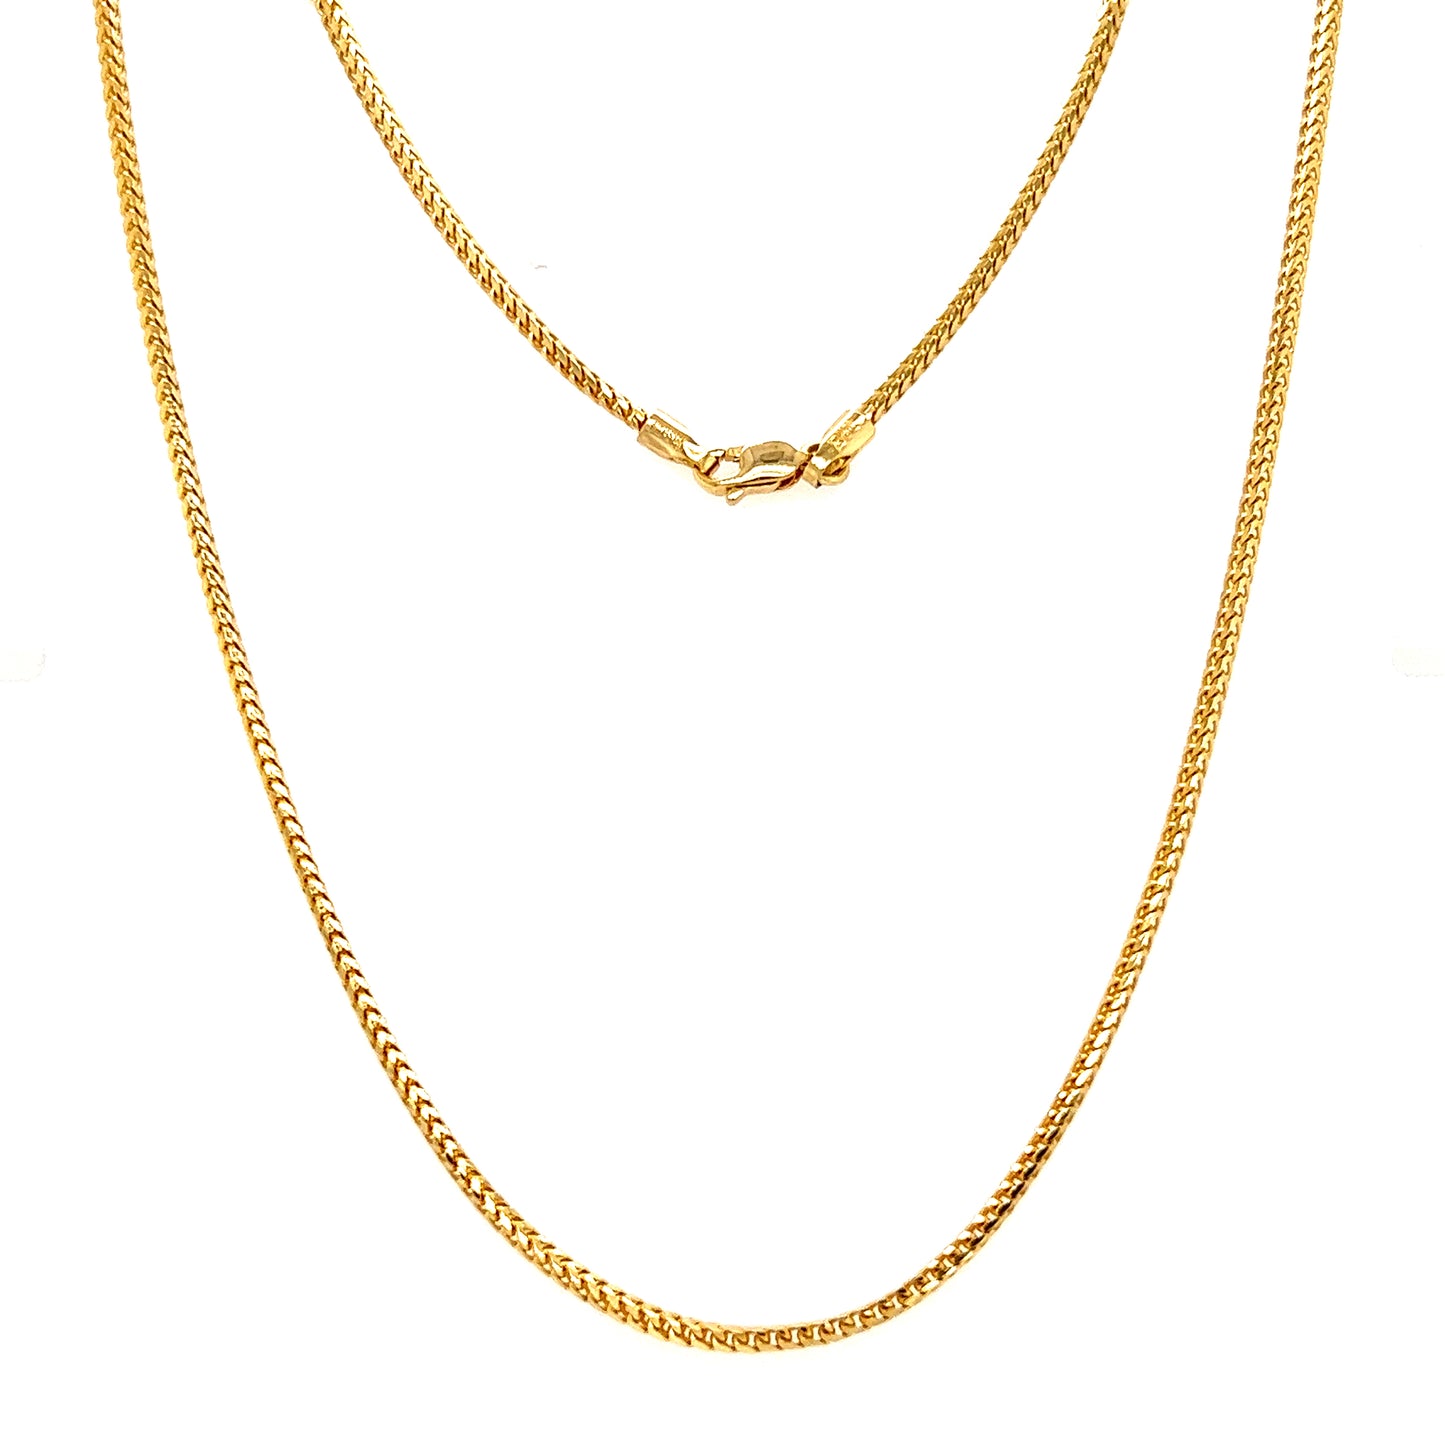 Franco 1.55mm Chain with 24in Length in 14K Yellow Gold Full Chain View